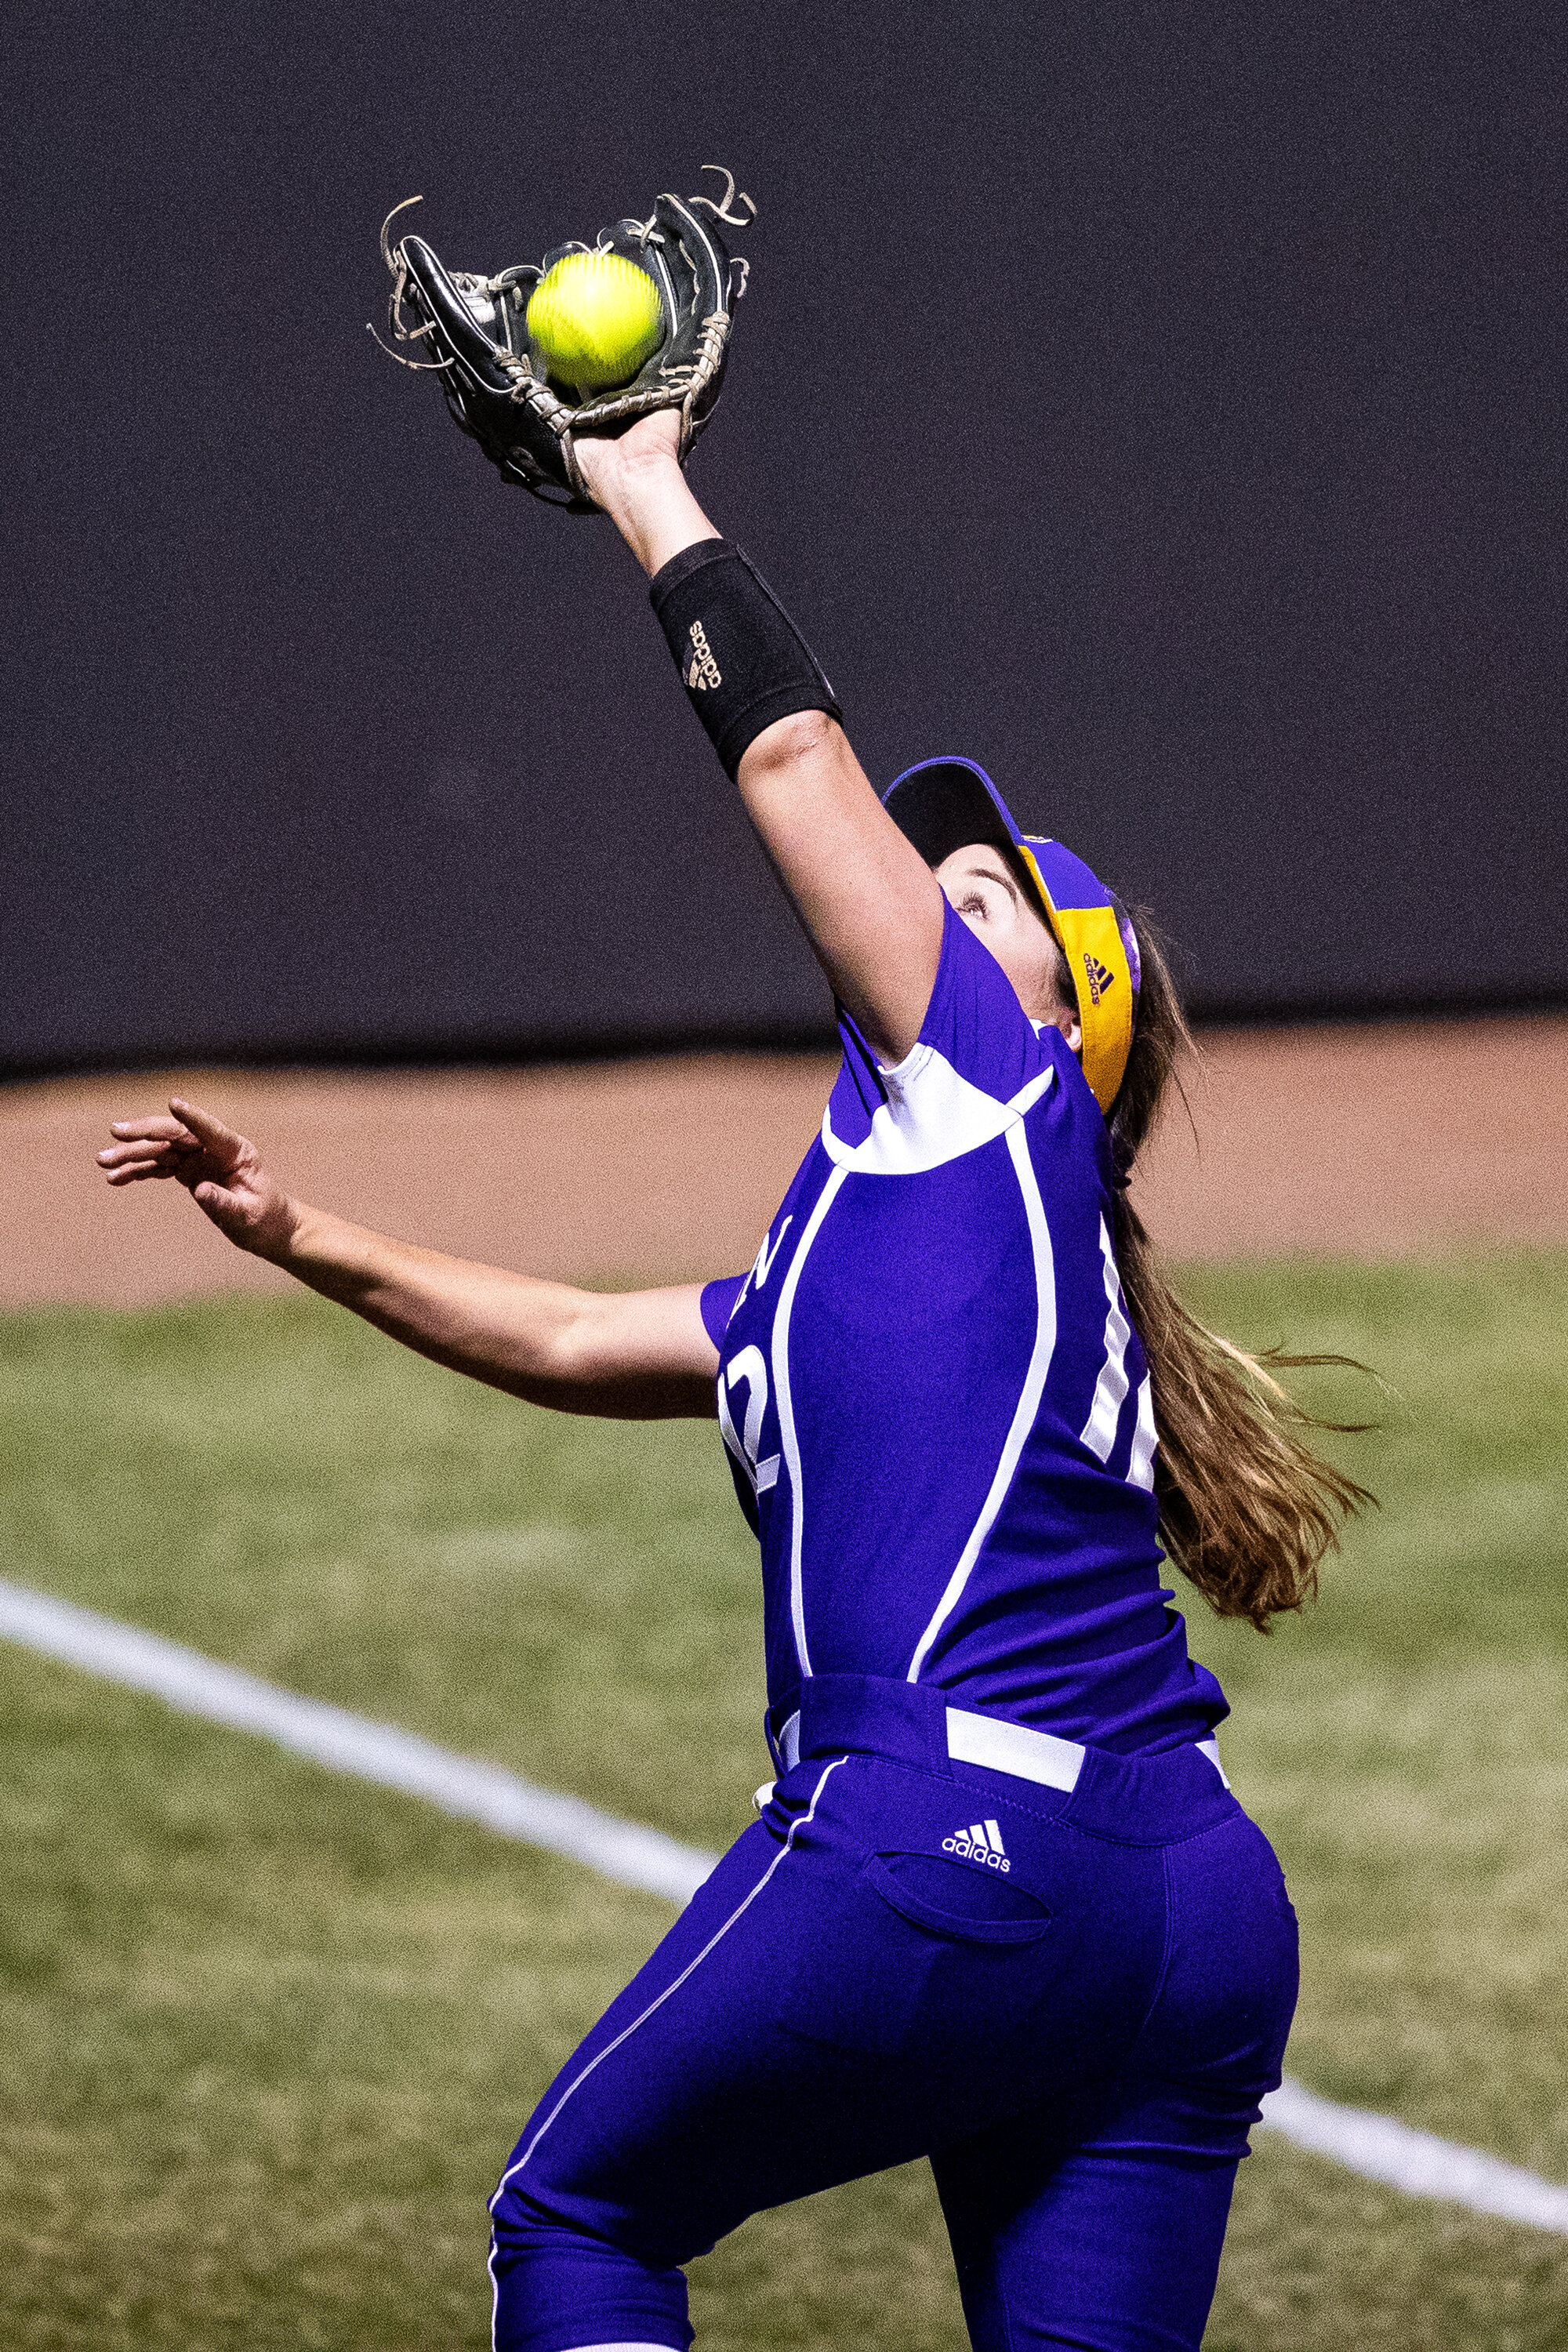  Western Illinois' Aly Compton makes an over-the-shoulder catch in foul territory during a softball game against Iowa on Wednesday, Mar. 27, 2019. The Fighting Leathernecks defeated the Hawkeyes 10-1.  